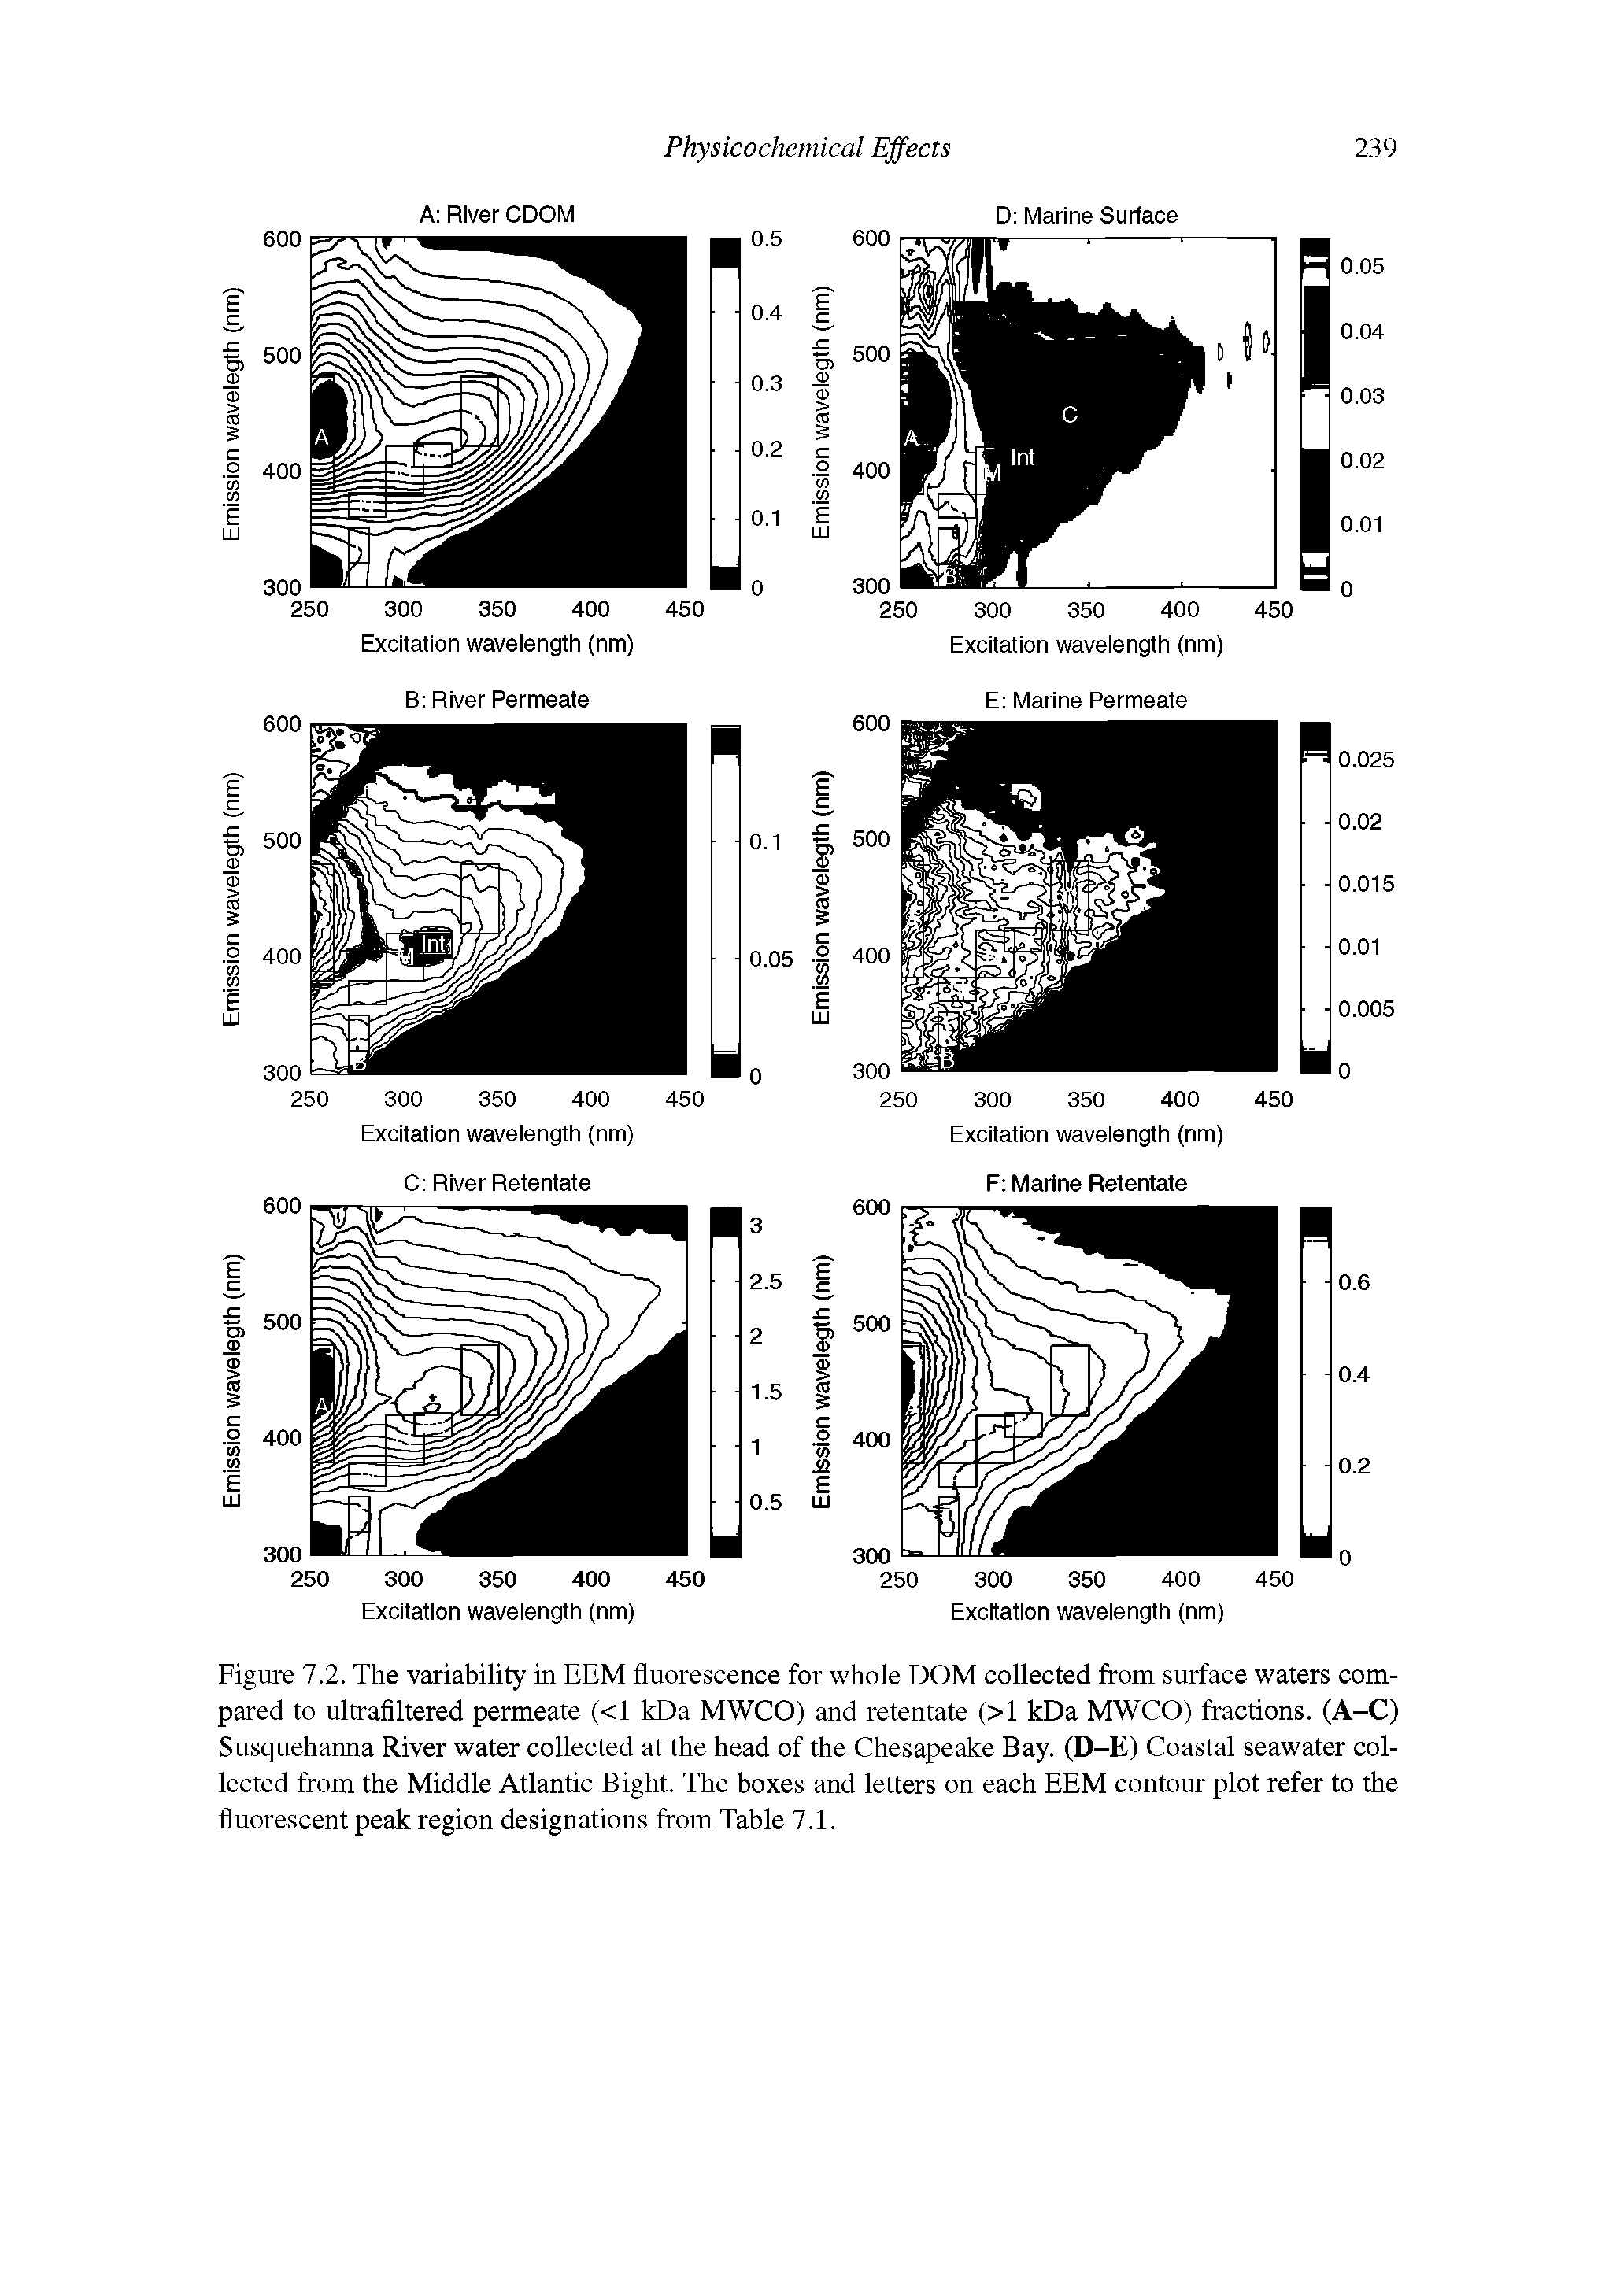 Figure 7.2. The variability in EEM fluorescence for whole DOM collected from surface waters compared to ultrafiltered permeate (<1 kDa MWCO) and retentate (>1 kDa MWCO) fractions. (A-C) Susquehanna River water collected at the head of the Chesapeake Bay. (D-E) Coastal seawater collected from the Middle Atlantic Bight. The boxes and letters on each EEM contour plot refer to the fluorescent peak region designations from Table 7.1.